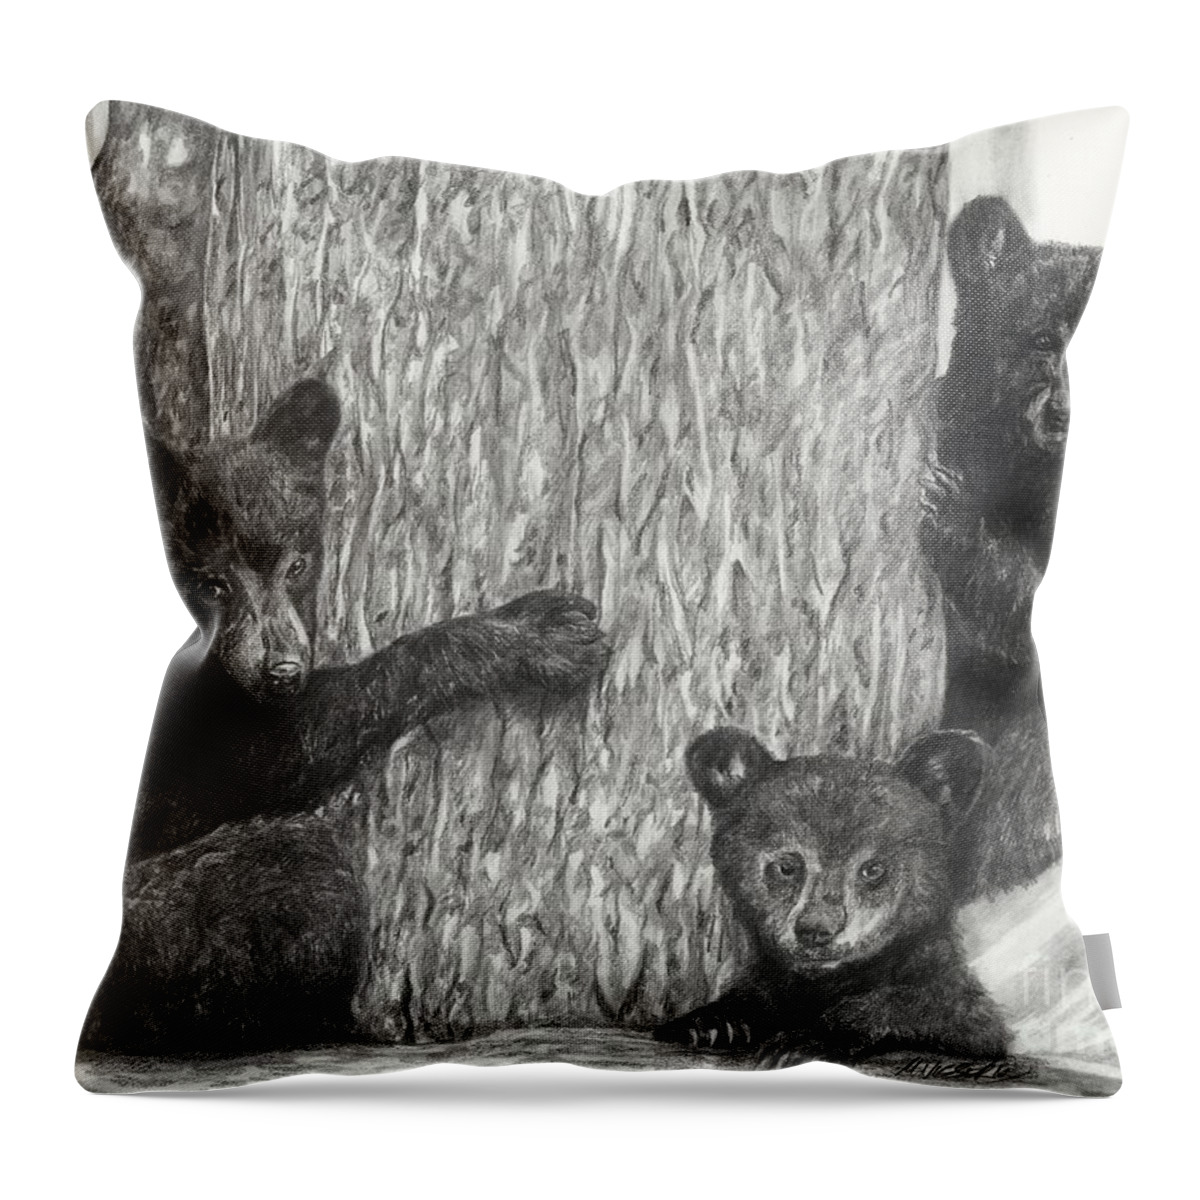 Bear Throw Pillow featuring the drawing Tree trio by Meagan Visser